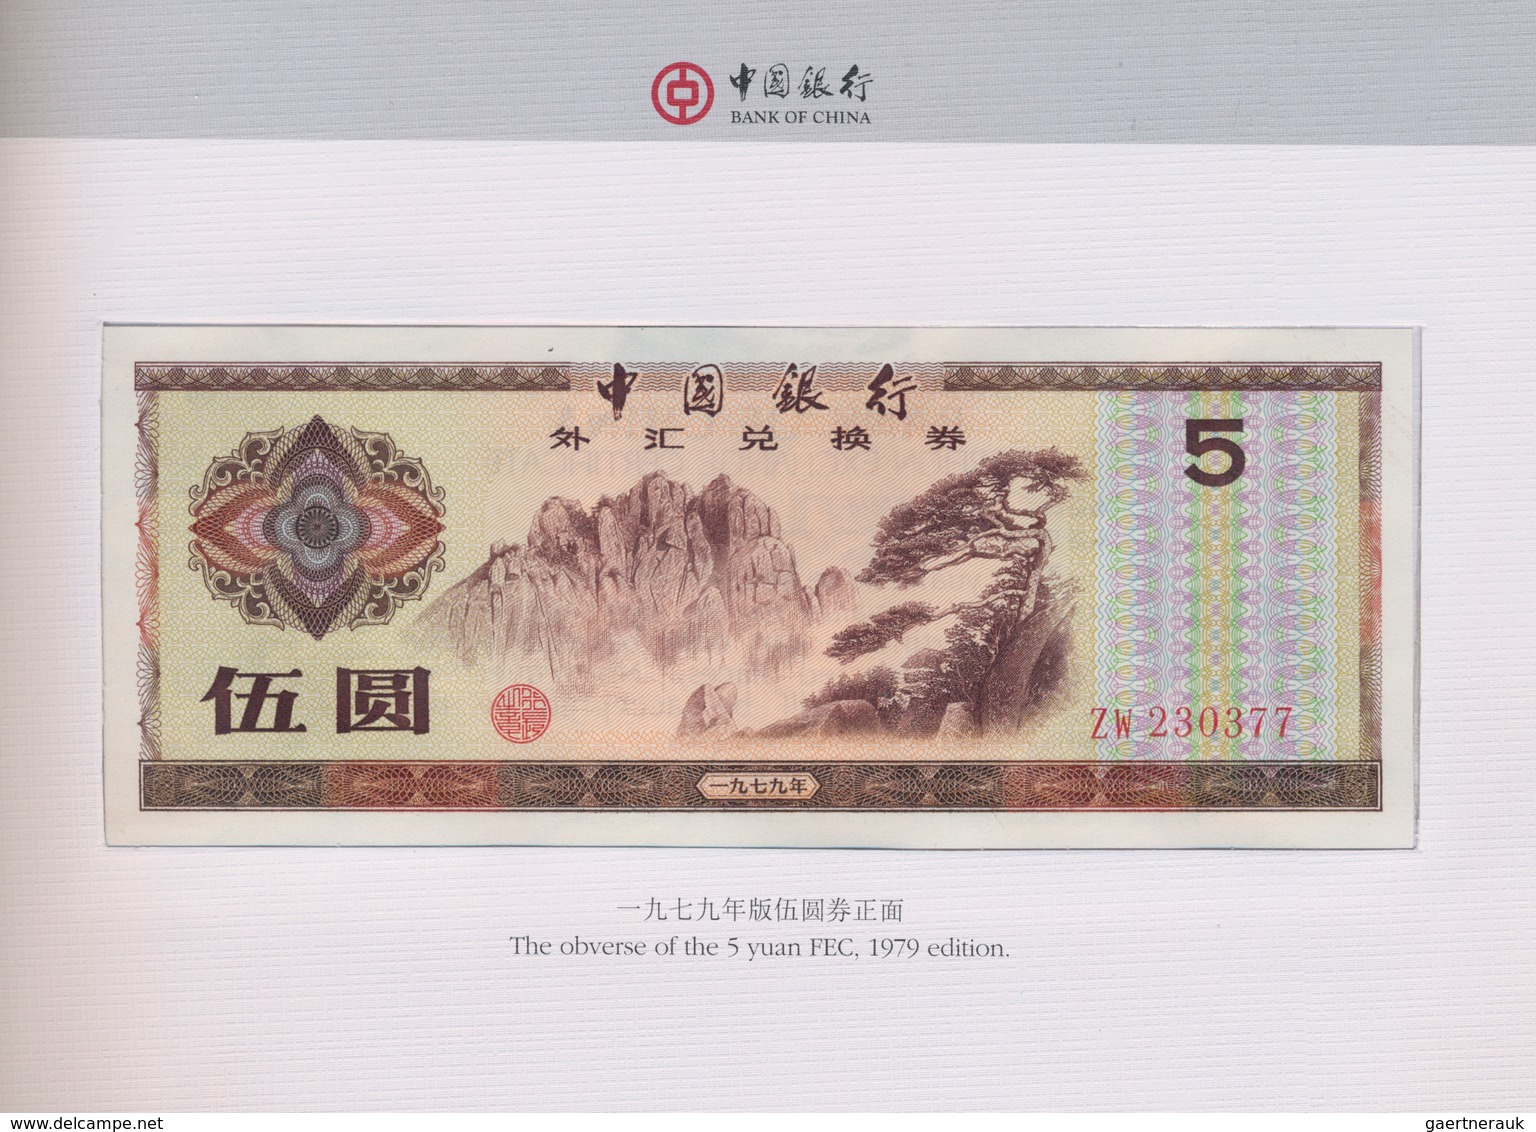 China: Bank of China Foreign Exchange Certificate Set of nine 1979-1988, including Pick FX1a and FX2